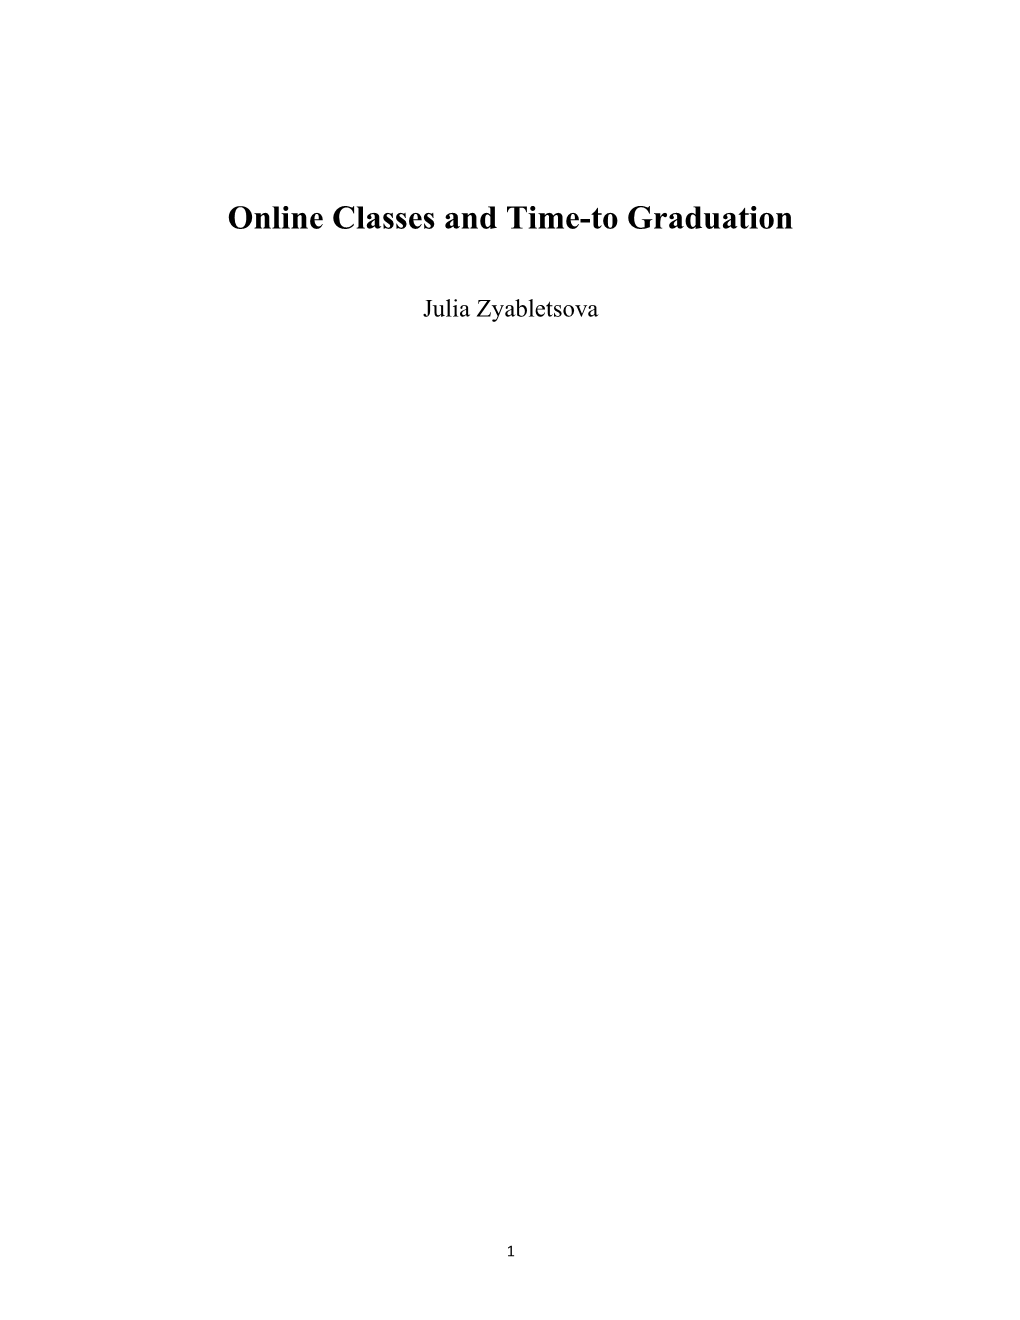 Online Classes and Time-To Graduation